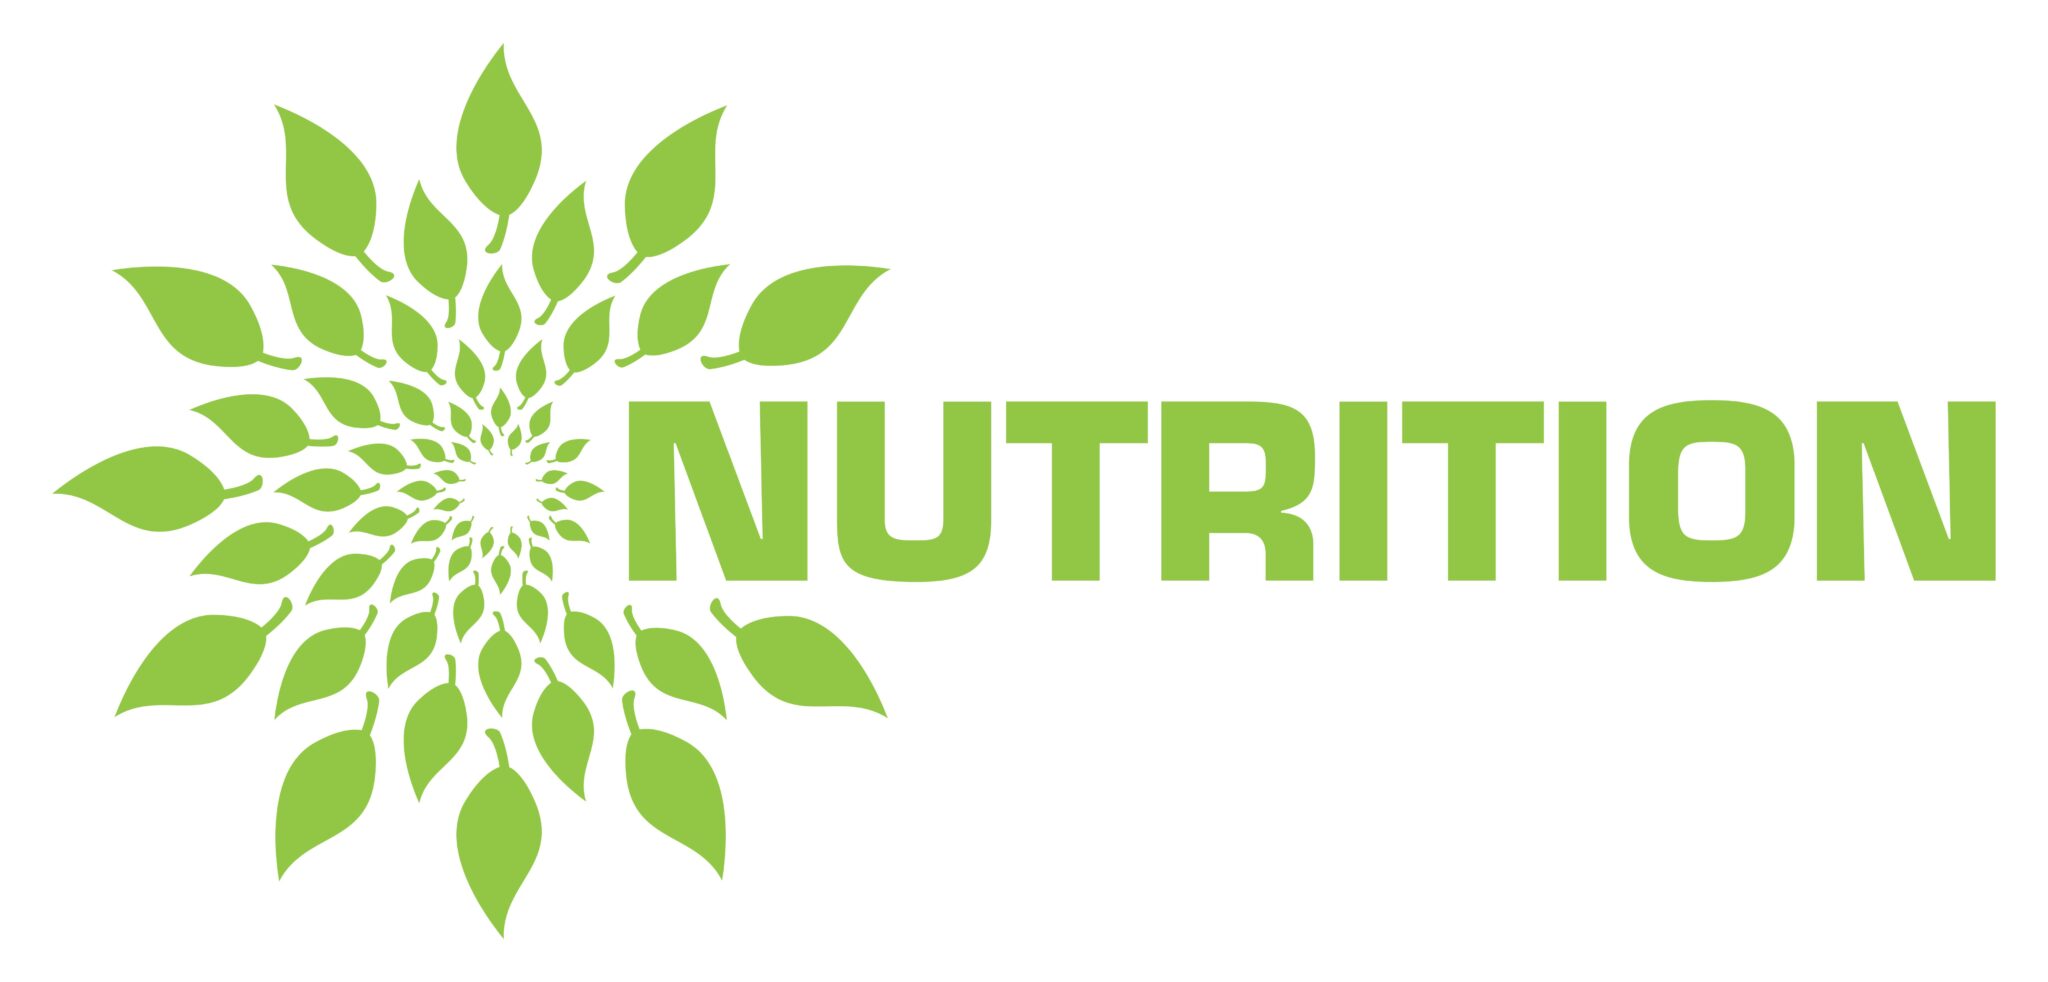 Nutrition Leaves Green Circular Text From Inside